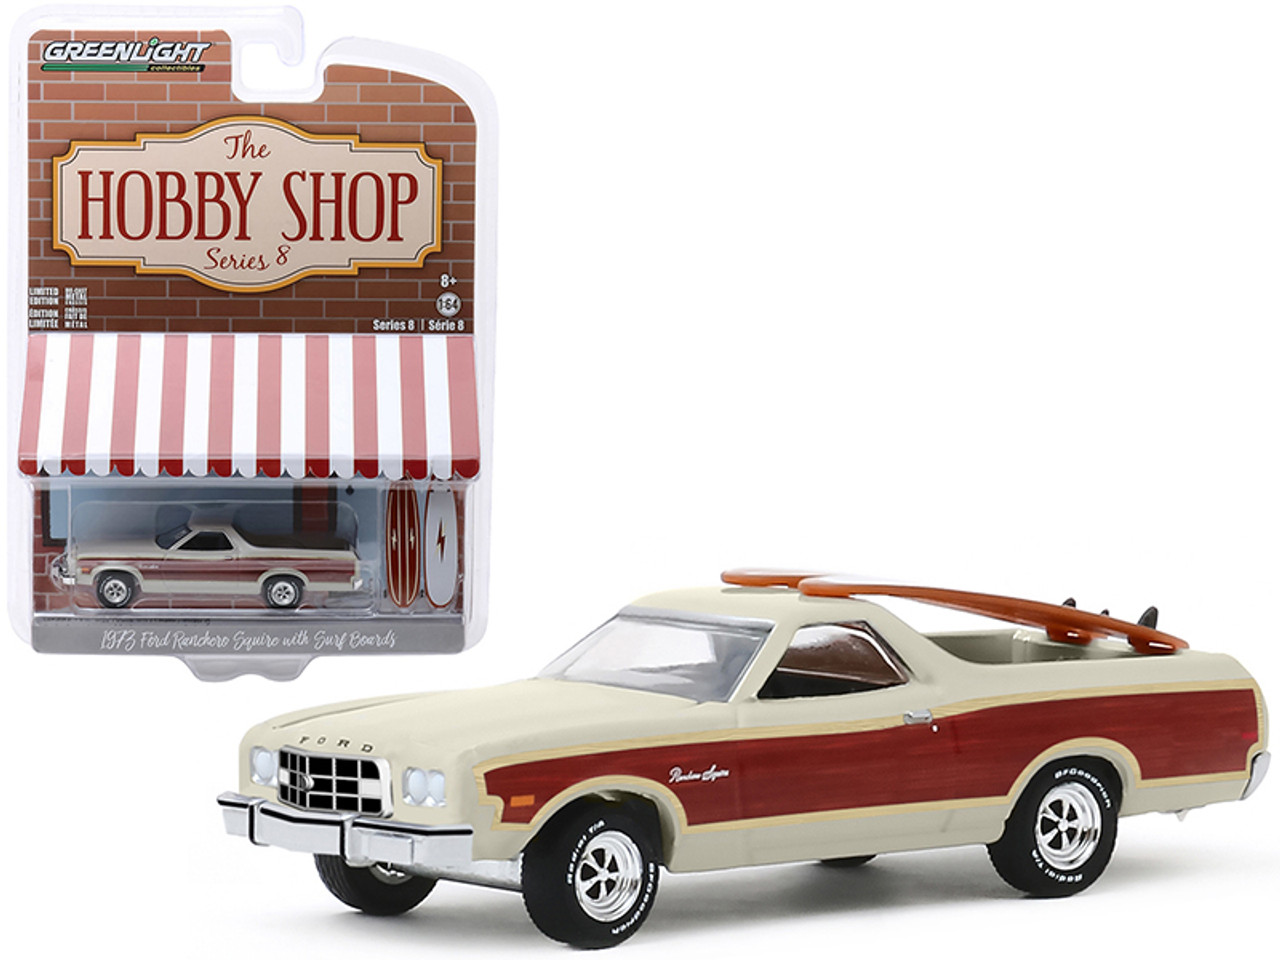 1973 Ford Ranchero Squire Beige with Woodgrain and Two Surfboards "The Hobby Shop" Series 8 1/64 Diecast Model Car by Greenlight